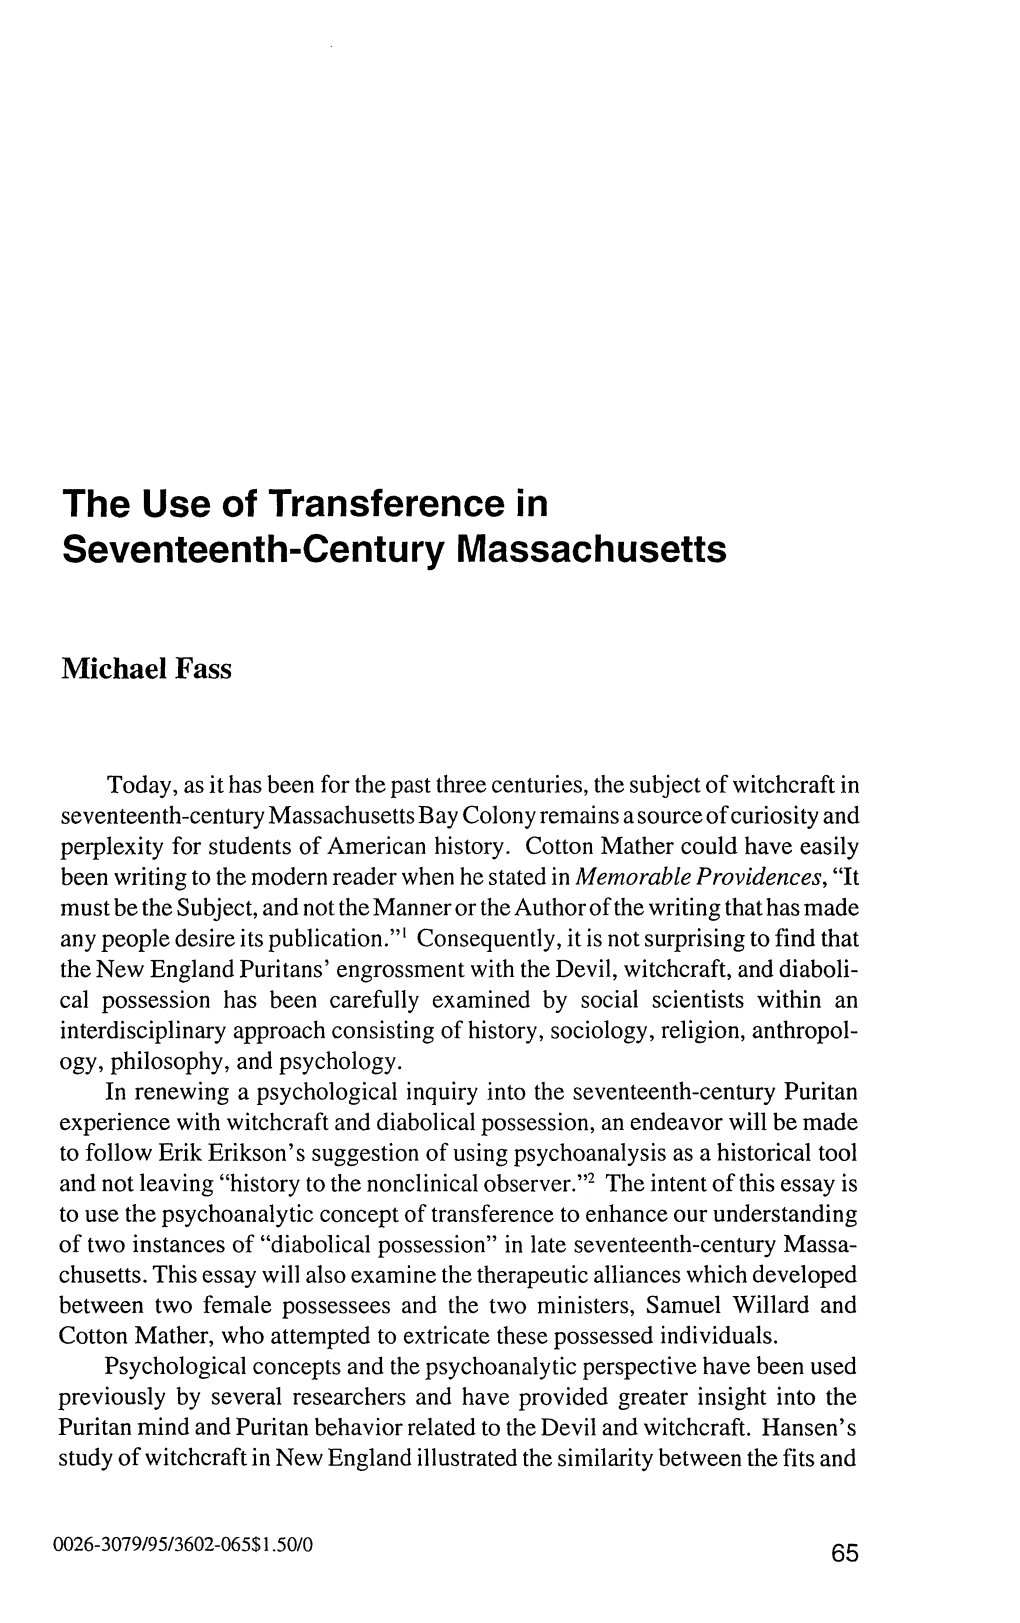 The Use of Transference in Seventeenth-Century Massachusetts